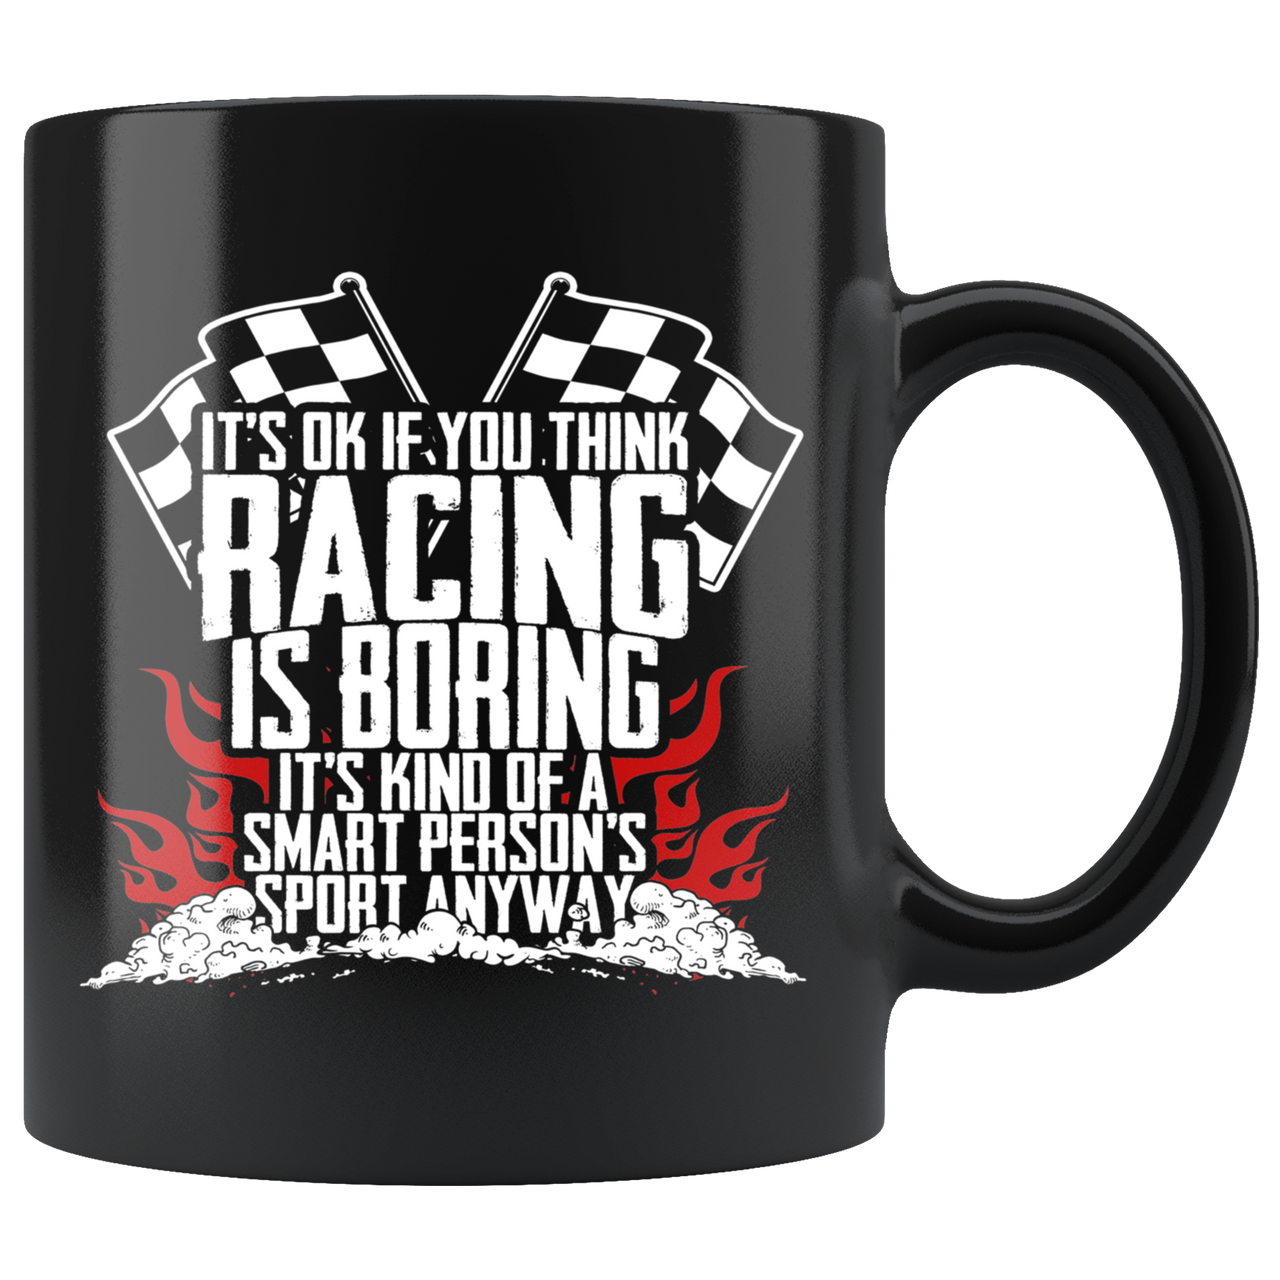 It's Okay If You Think Racing Is Boring It's Kind Of A Smart Person's Sport Anyway Mug!